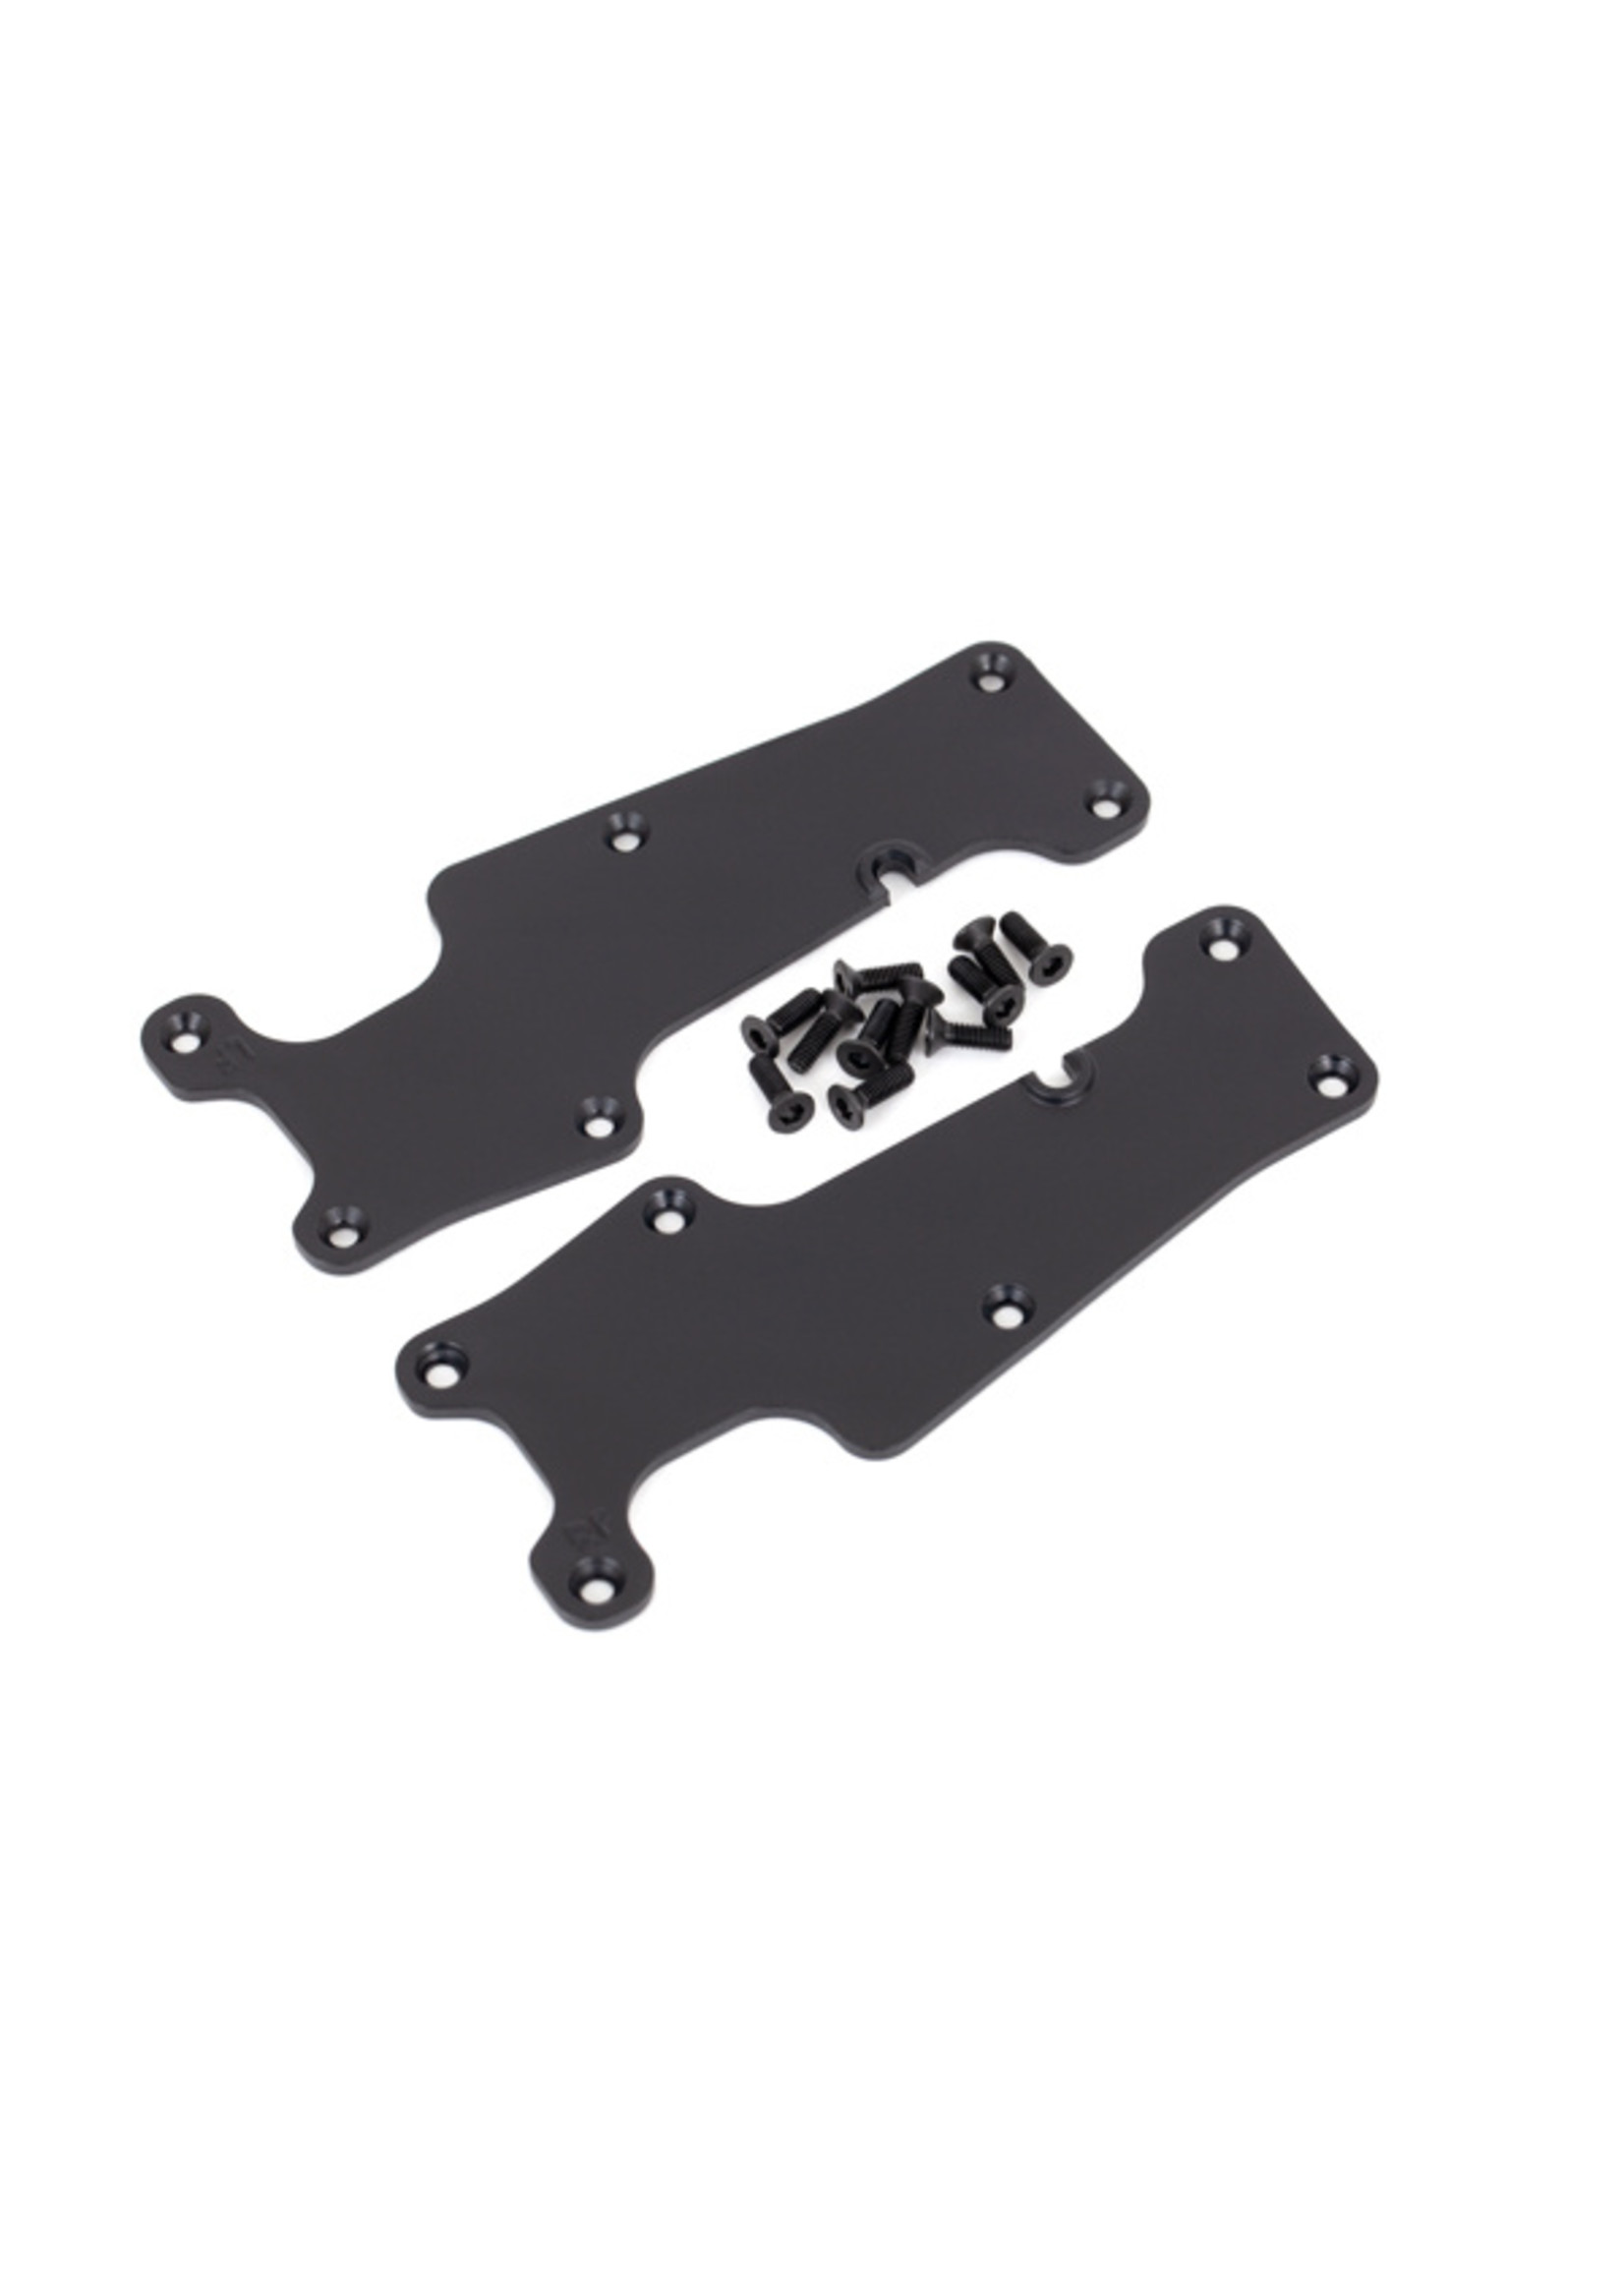 Traxxas 9633 - Suspension Arm Cover Front, Left & Right - Black